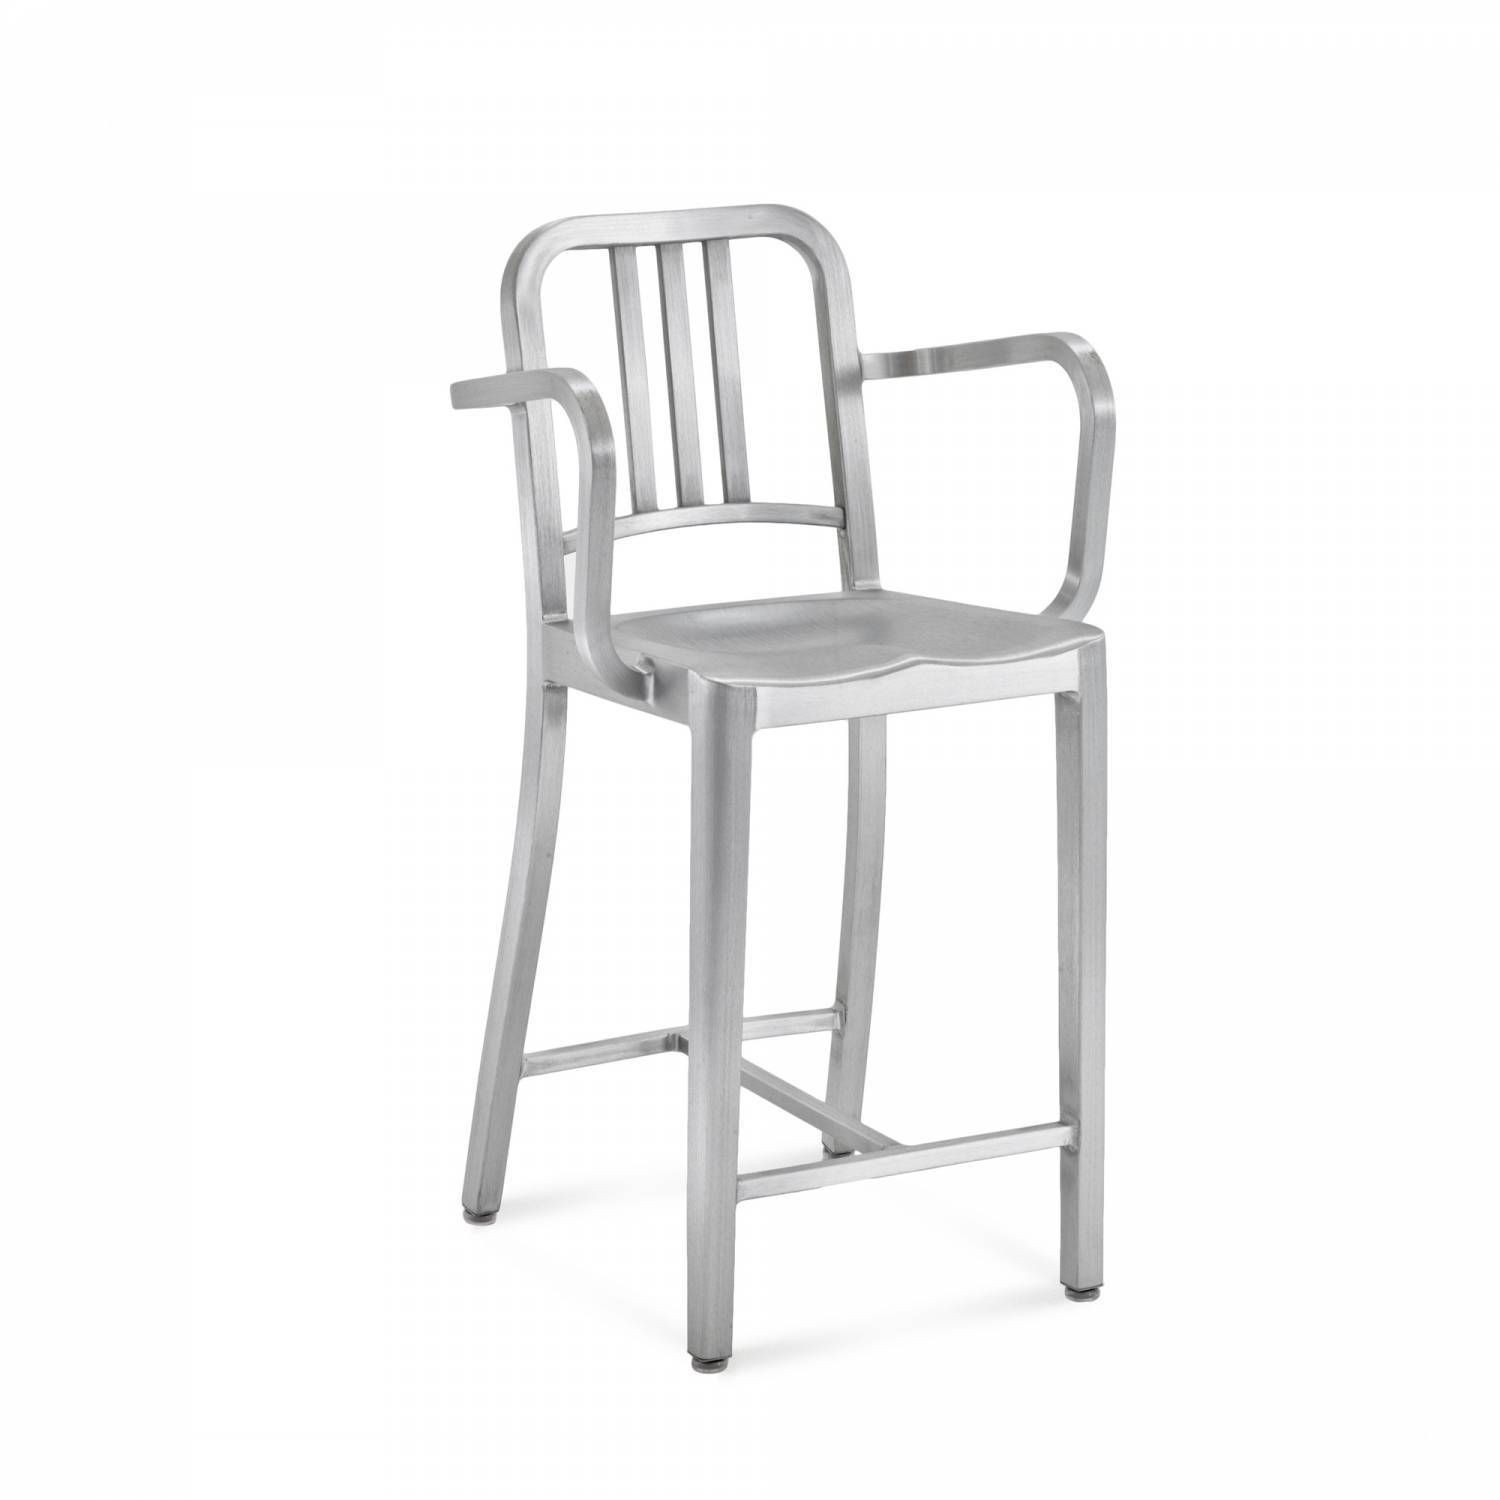 Emeco navy counter stool with arms in 2020 aluminum bar